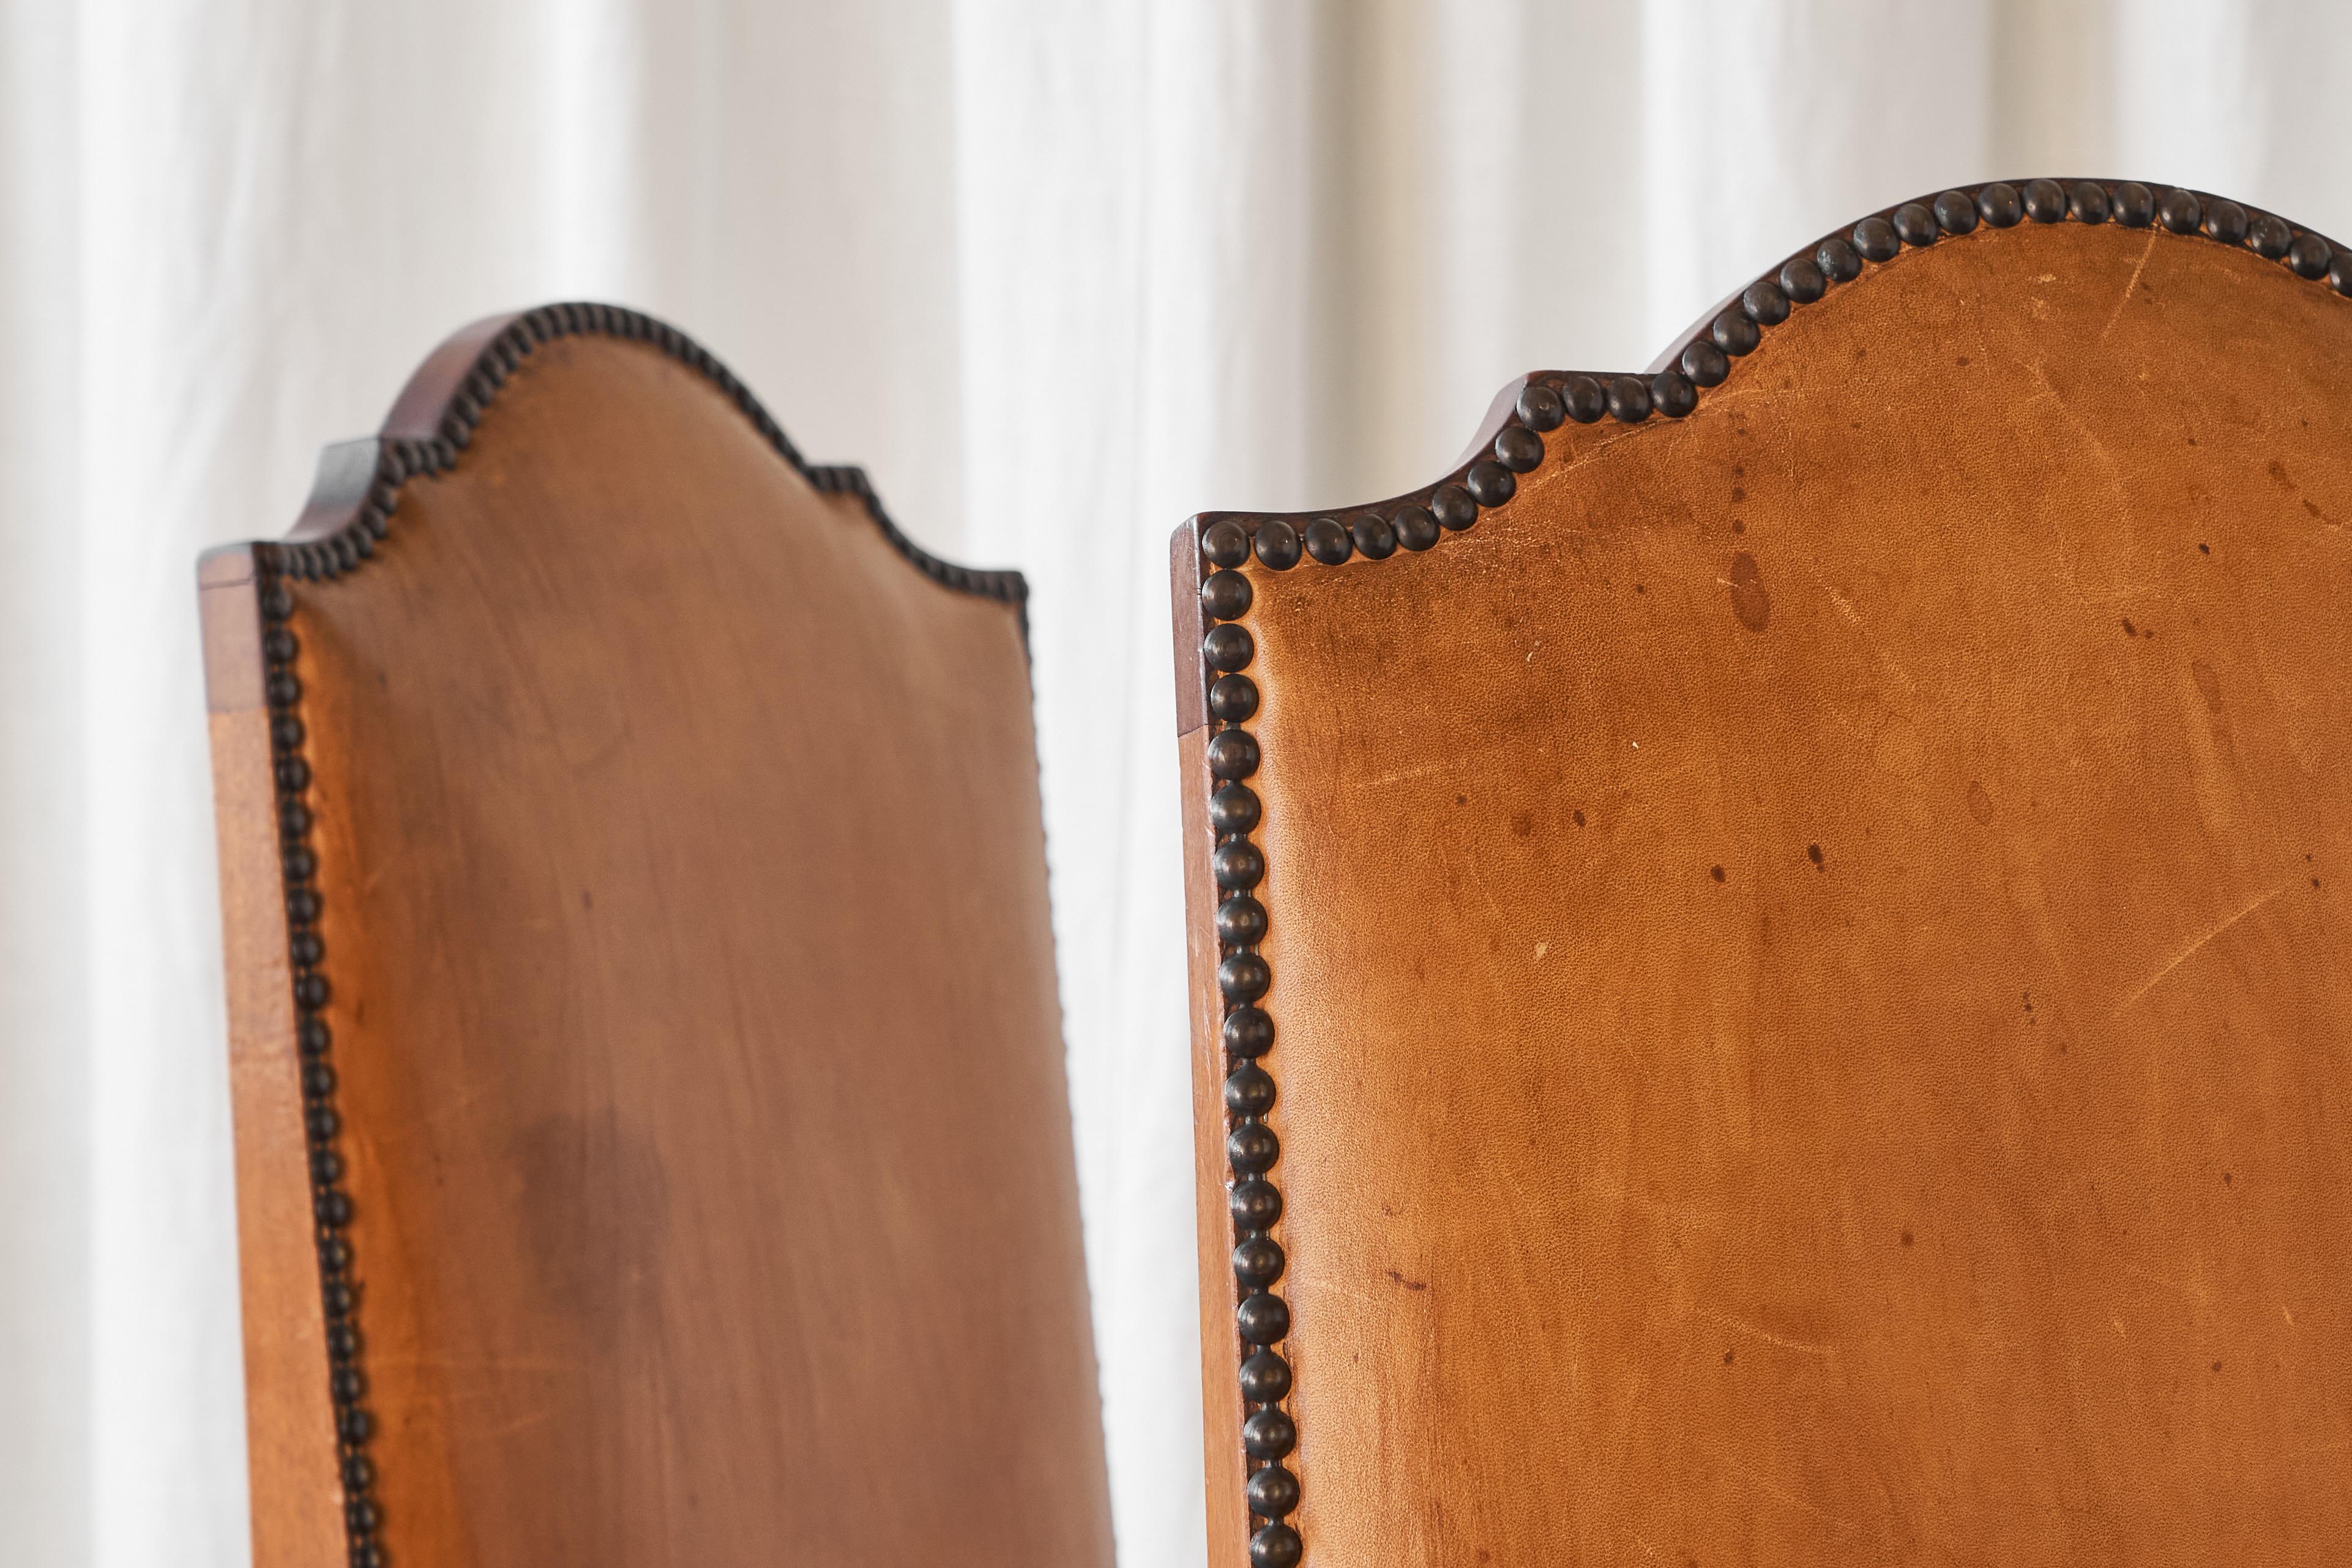 't Woonhuys Amsterdam Rare Pair of Side Chairs in Patinated Cognac Leather 1920s For Sale 8